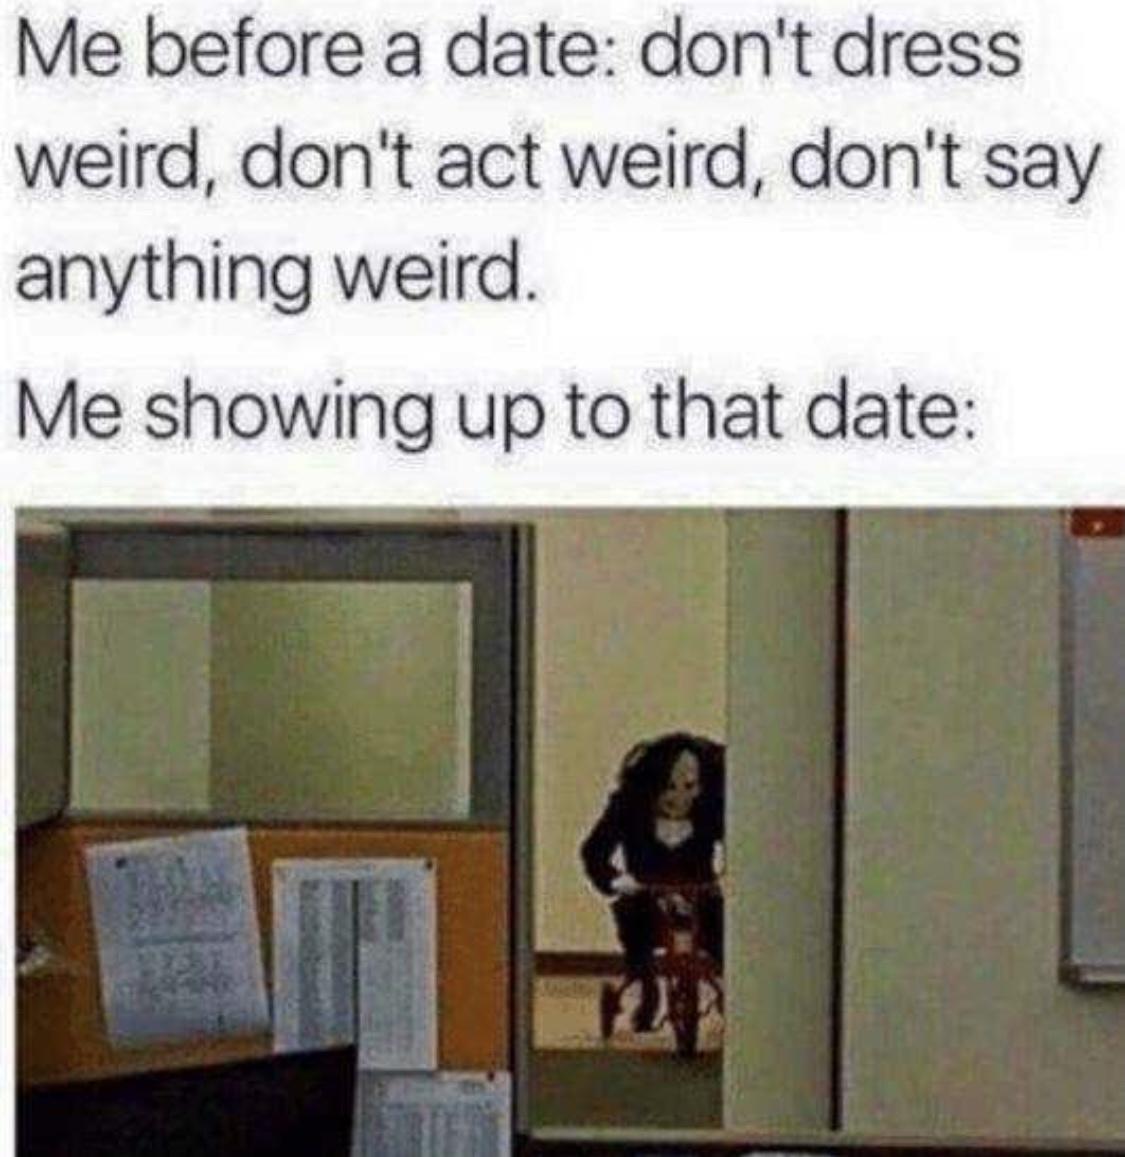 me before a date meme - Me before a date don't dress weird, don't act weird, don't say anything weird. Me showing up to that date re